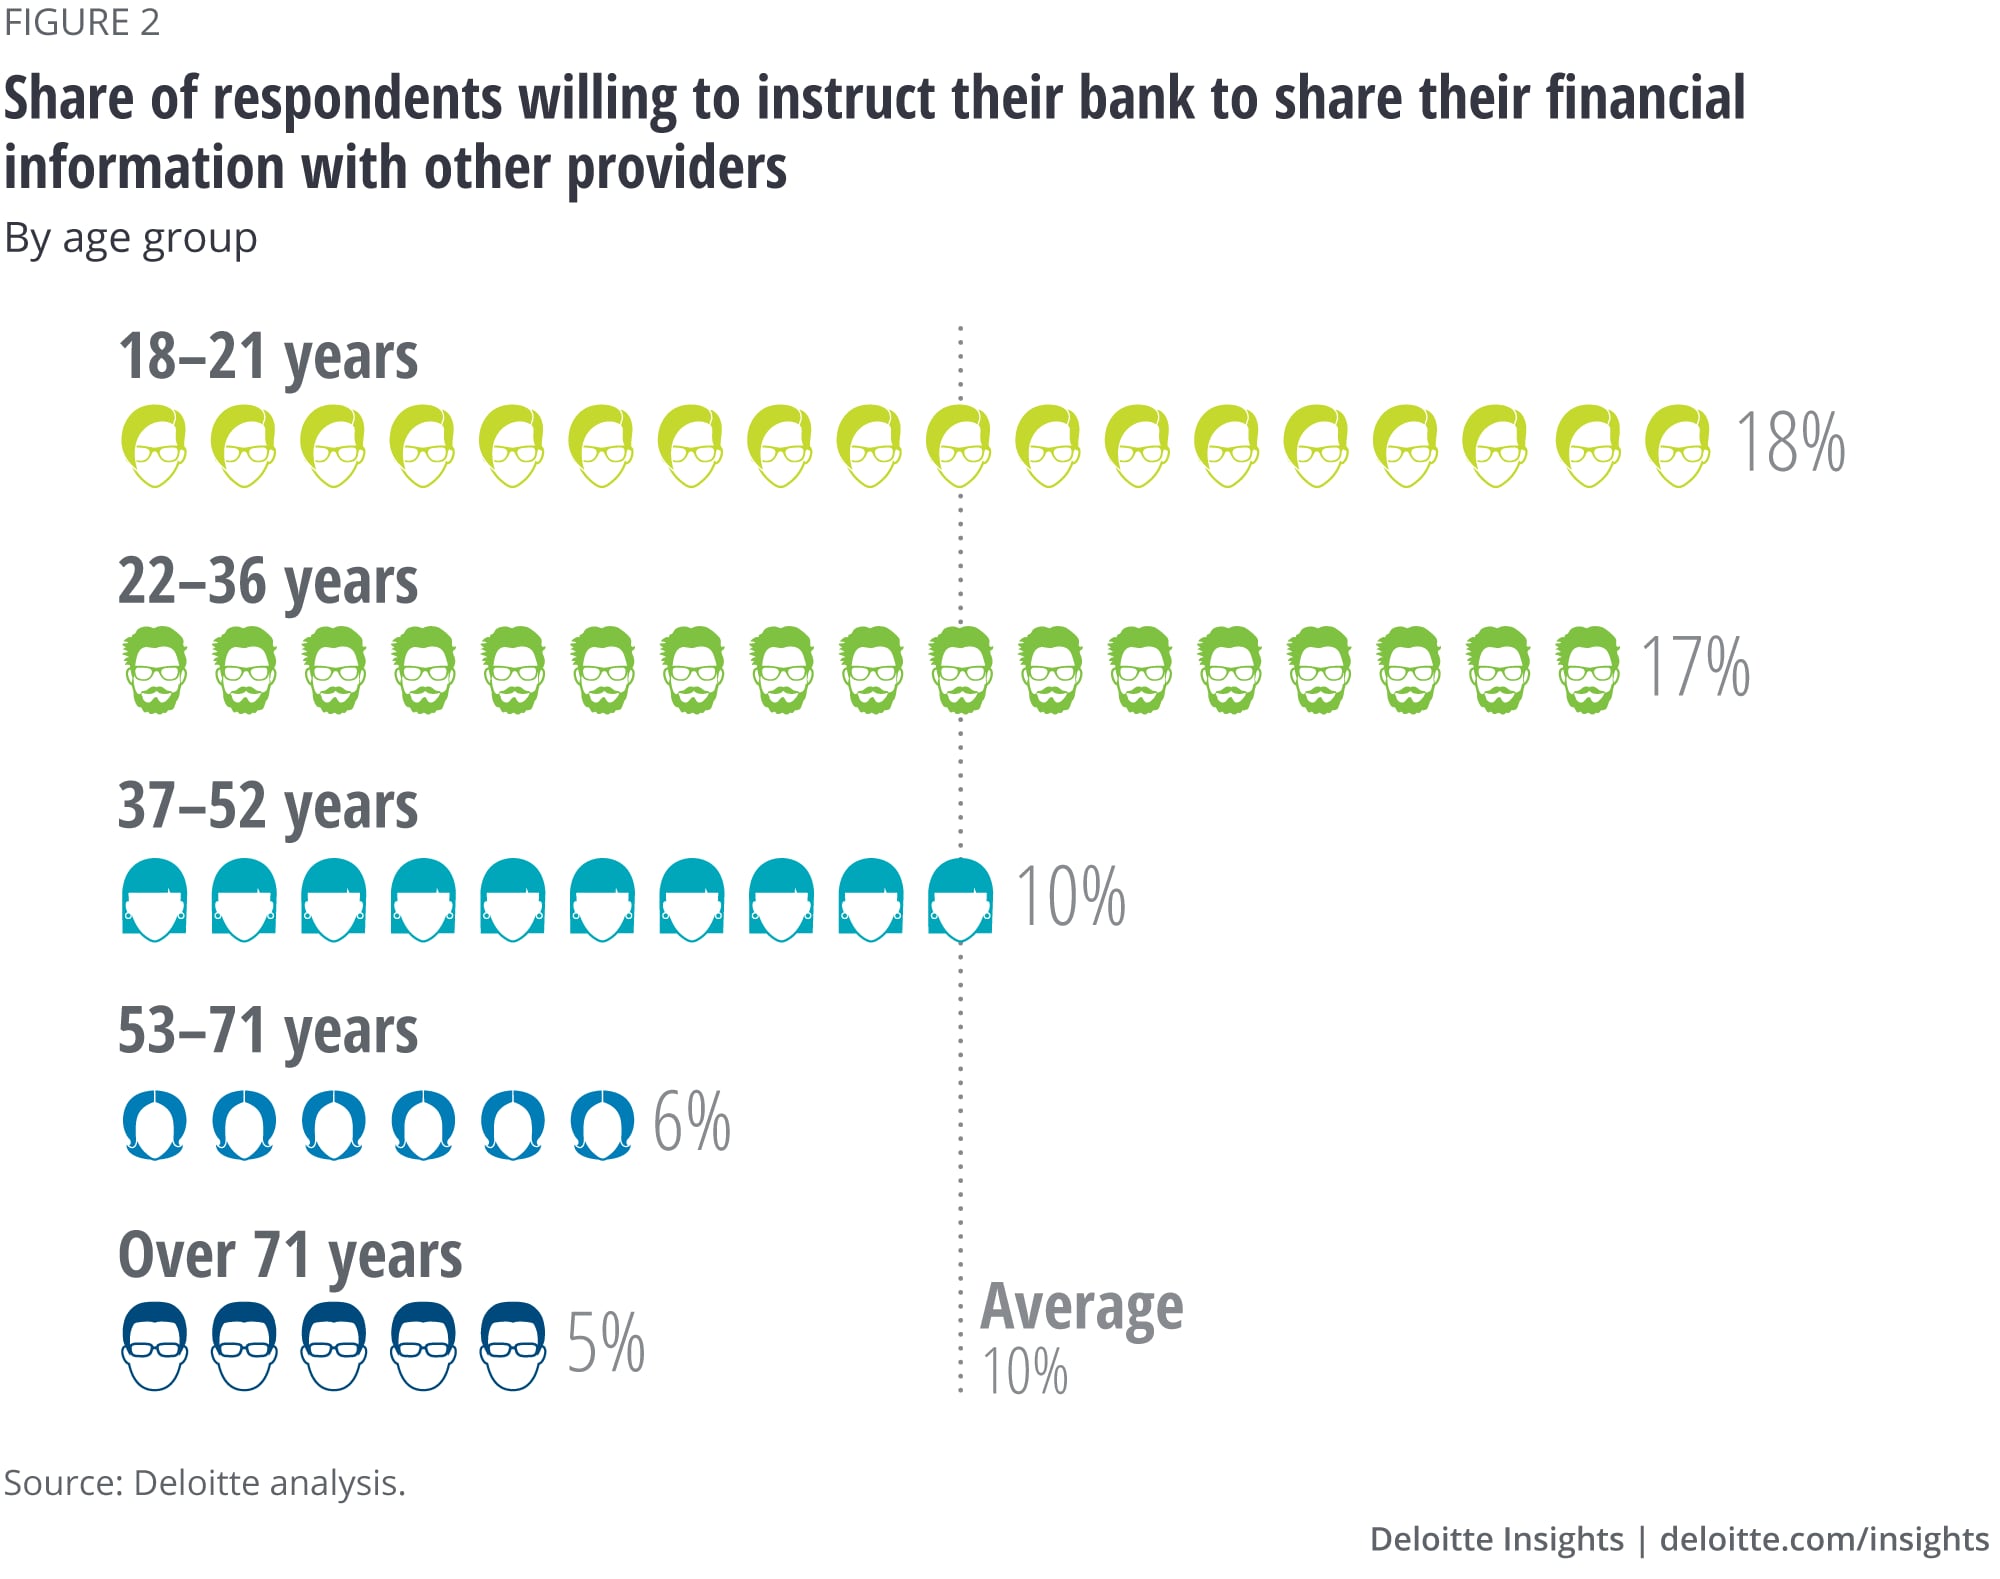 Share of respondents willing to instruct their bank to share their financial information with other providers, by age group